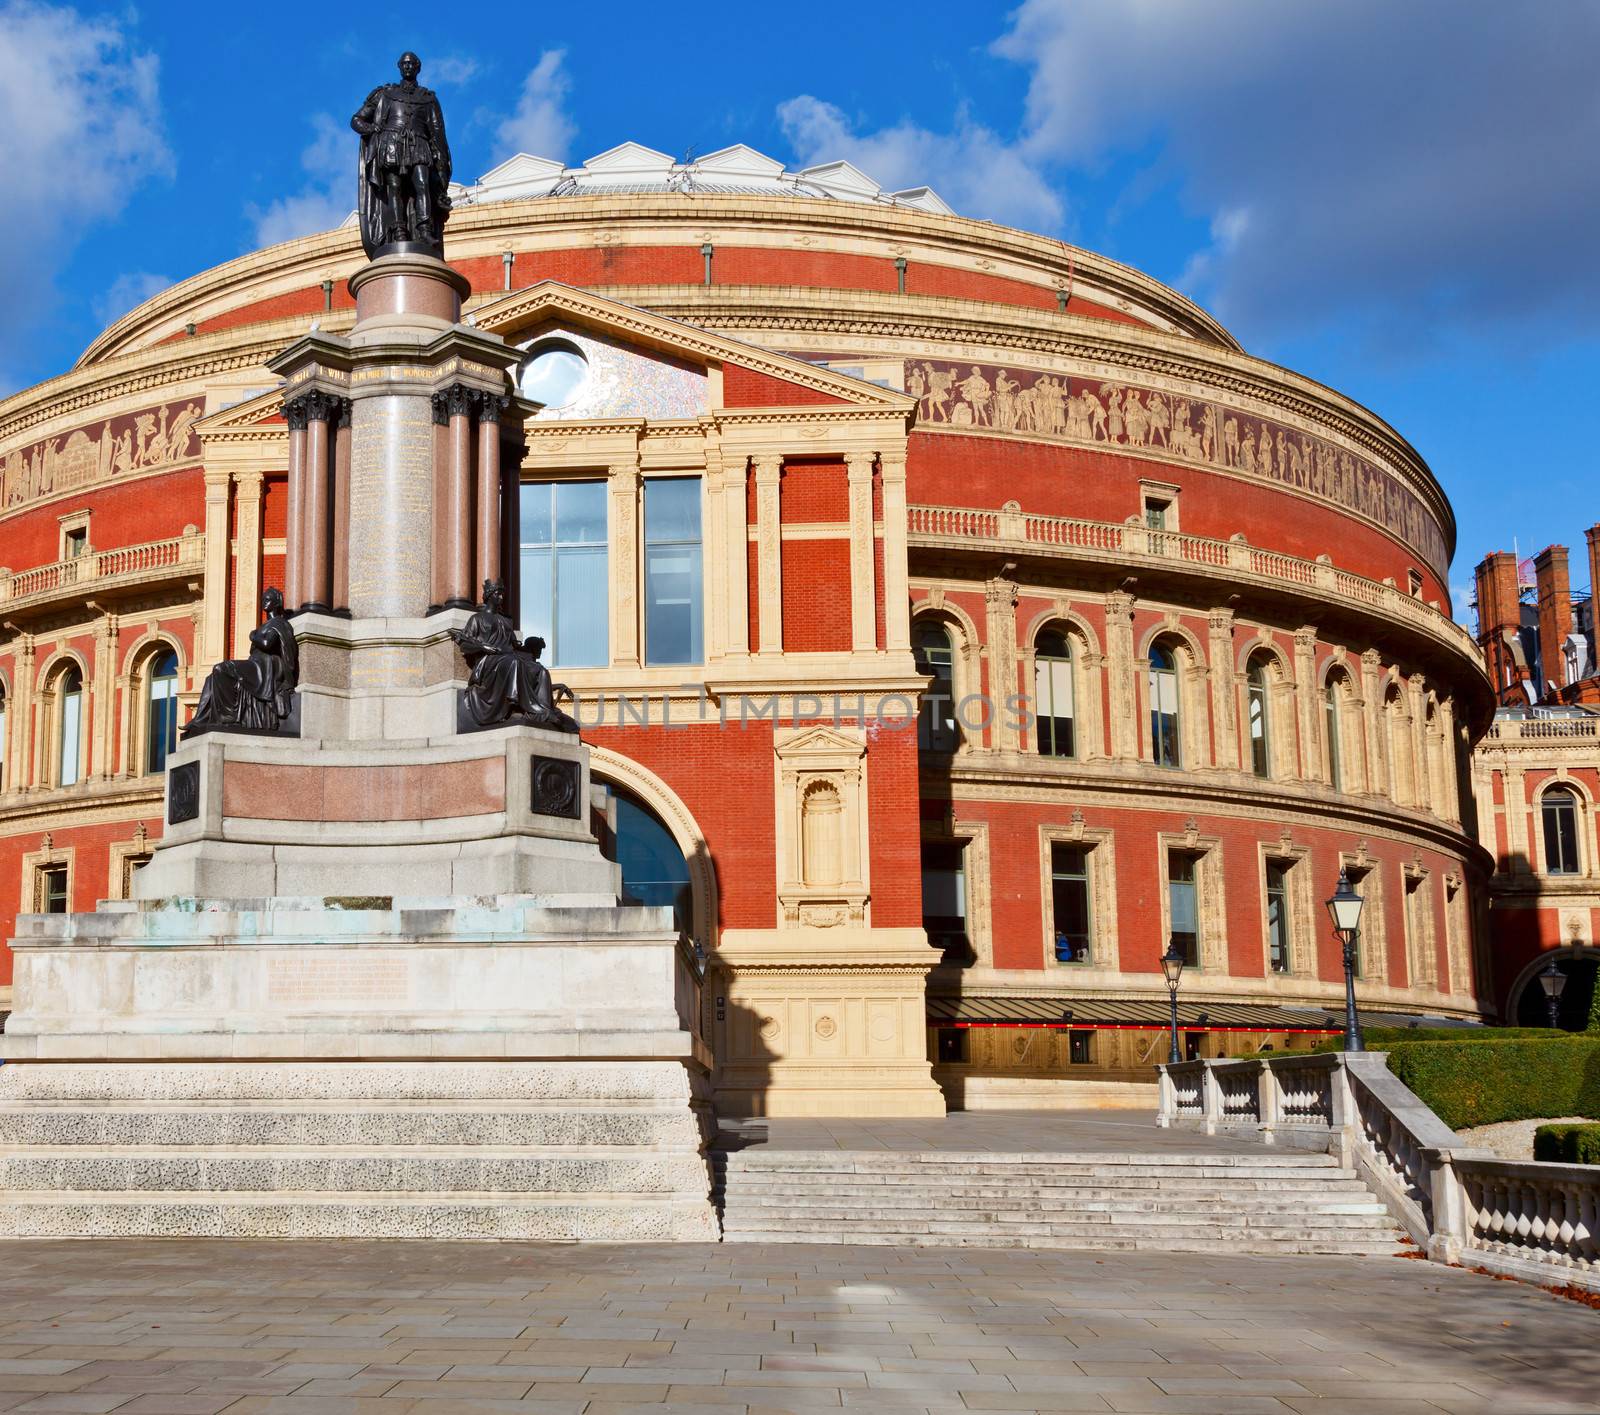 The Royal Albert Hall in the City of Westminster, London, England